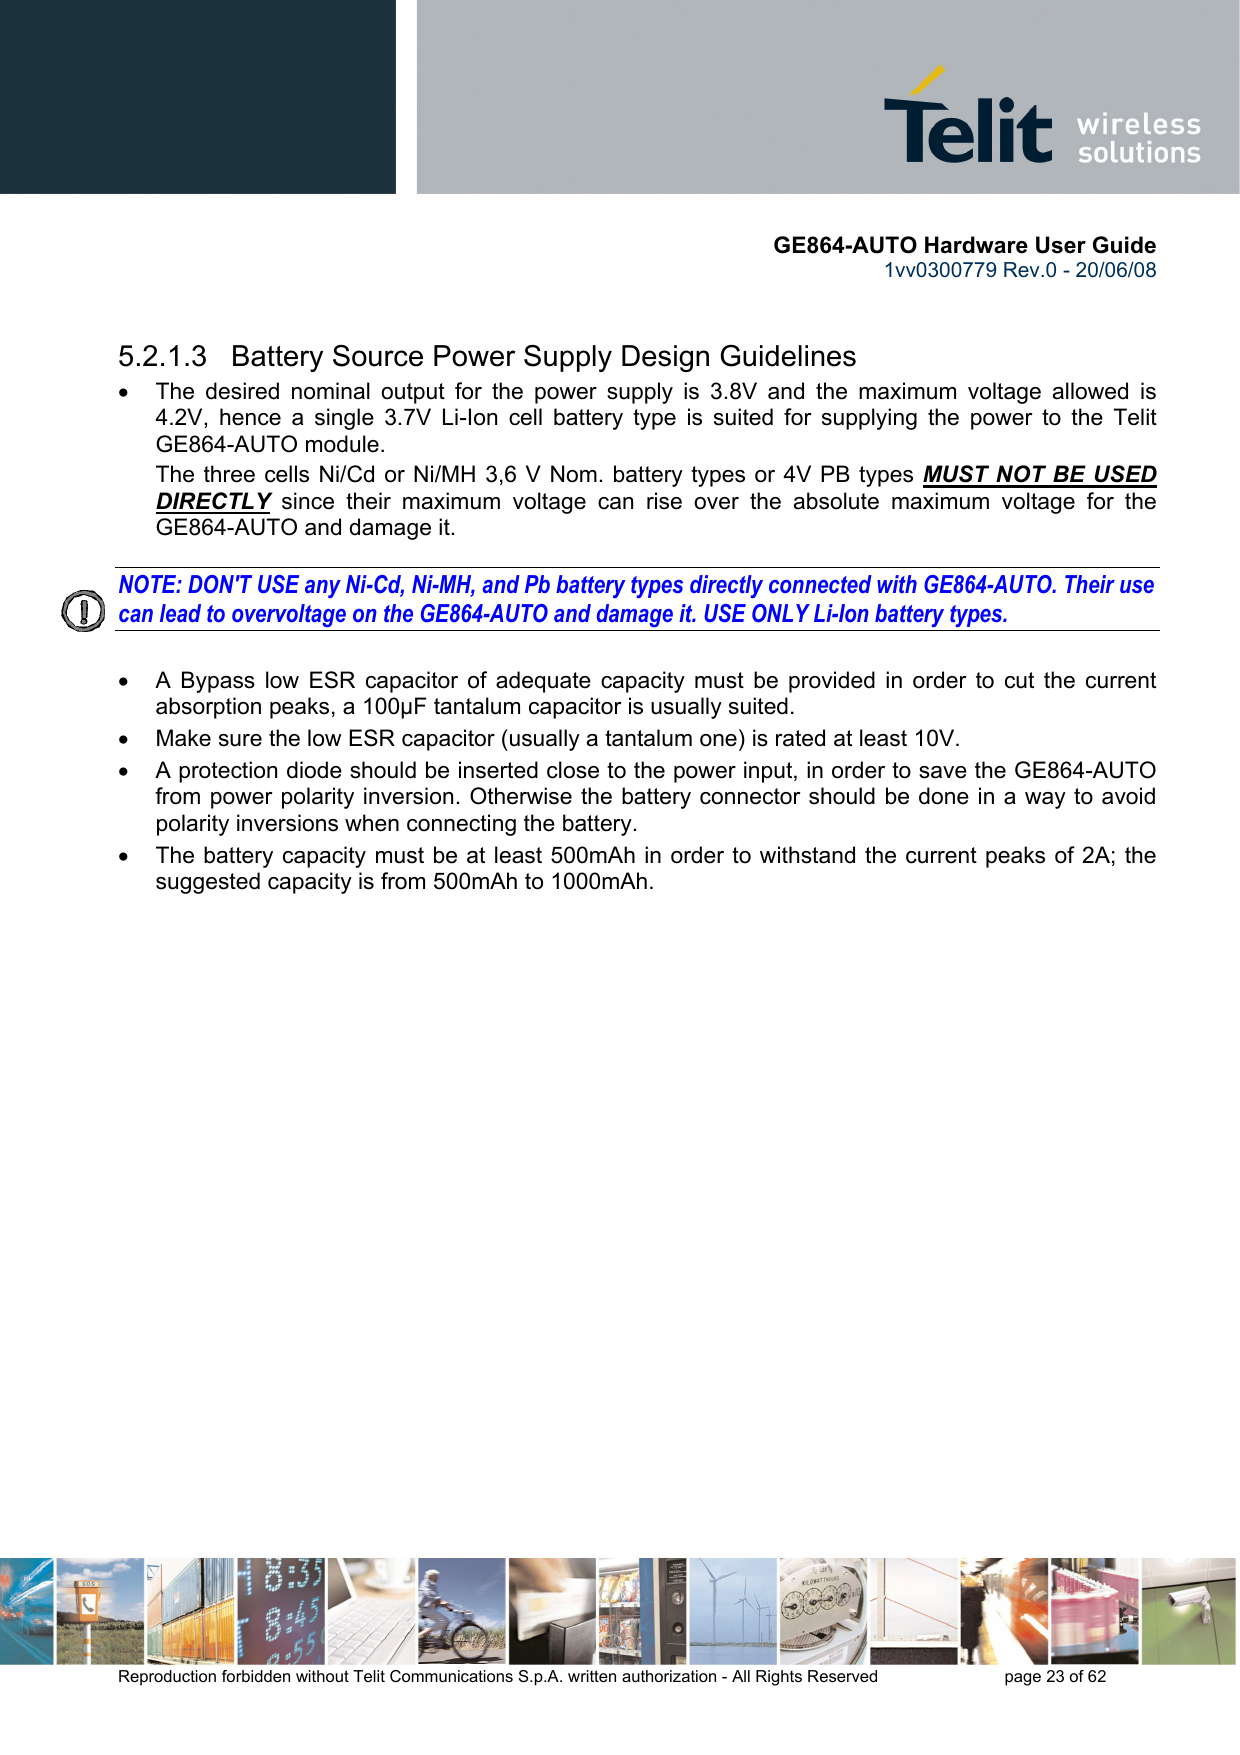       GE864-AUTO Hardware User Guide 1vv0300779 Rev.0 - 20/06/08      Reproduction forbidden without Telit Communications S.p.A. written authorization - All Rights Reserved    page 23 of 62    5.2.1.3   Battery Source Power Supply Design Guidelines •  The desired nominal output for the power supply is 3.8V and the maximum voltage allowed is 4.2V, hence a single 3.7V Li-Ion cell battery type is suited for supplying the power to the Telit GE864-AUTO module. The three cells Ni/Cd or Ni/MH 3,6 V Nom. battery types or 4V PB types MUST NOT BE USED DIRECTLY since their maximum voltage can rise over the absolute maximum voltage for the GE864-AUTO and damage it.  NOTE: DON&apos;T USE any Ni-Cd, Ni-MH, and Pb battery types directly connected with GE864-AUTO. Their use can lead to overvoltage on the GE864-AUTO and damage it. USE ONLY Li-Ion battery types.  •  A Bypass low ESR capacitor of adequate capacity must be provided in order to cut the current absorption peaks, a 100μF tantalum capacitor is usually suited. •  Make sure the low ESR capacitor (usually a tantalum one) is rated at least 10V. •  A protection diode should be inserted close to the power input, in order to save the GE864-AUTO from power polarity inversion. Otherwise the battery connector should be done in a way to avoid polarity inversions when connecting the battery. •  The battery capacity must be at least 500mAh in order to withstand the current peaks of 2A; the suggested capacity is from 500mAh to 1000mAh. 